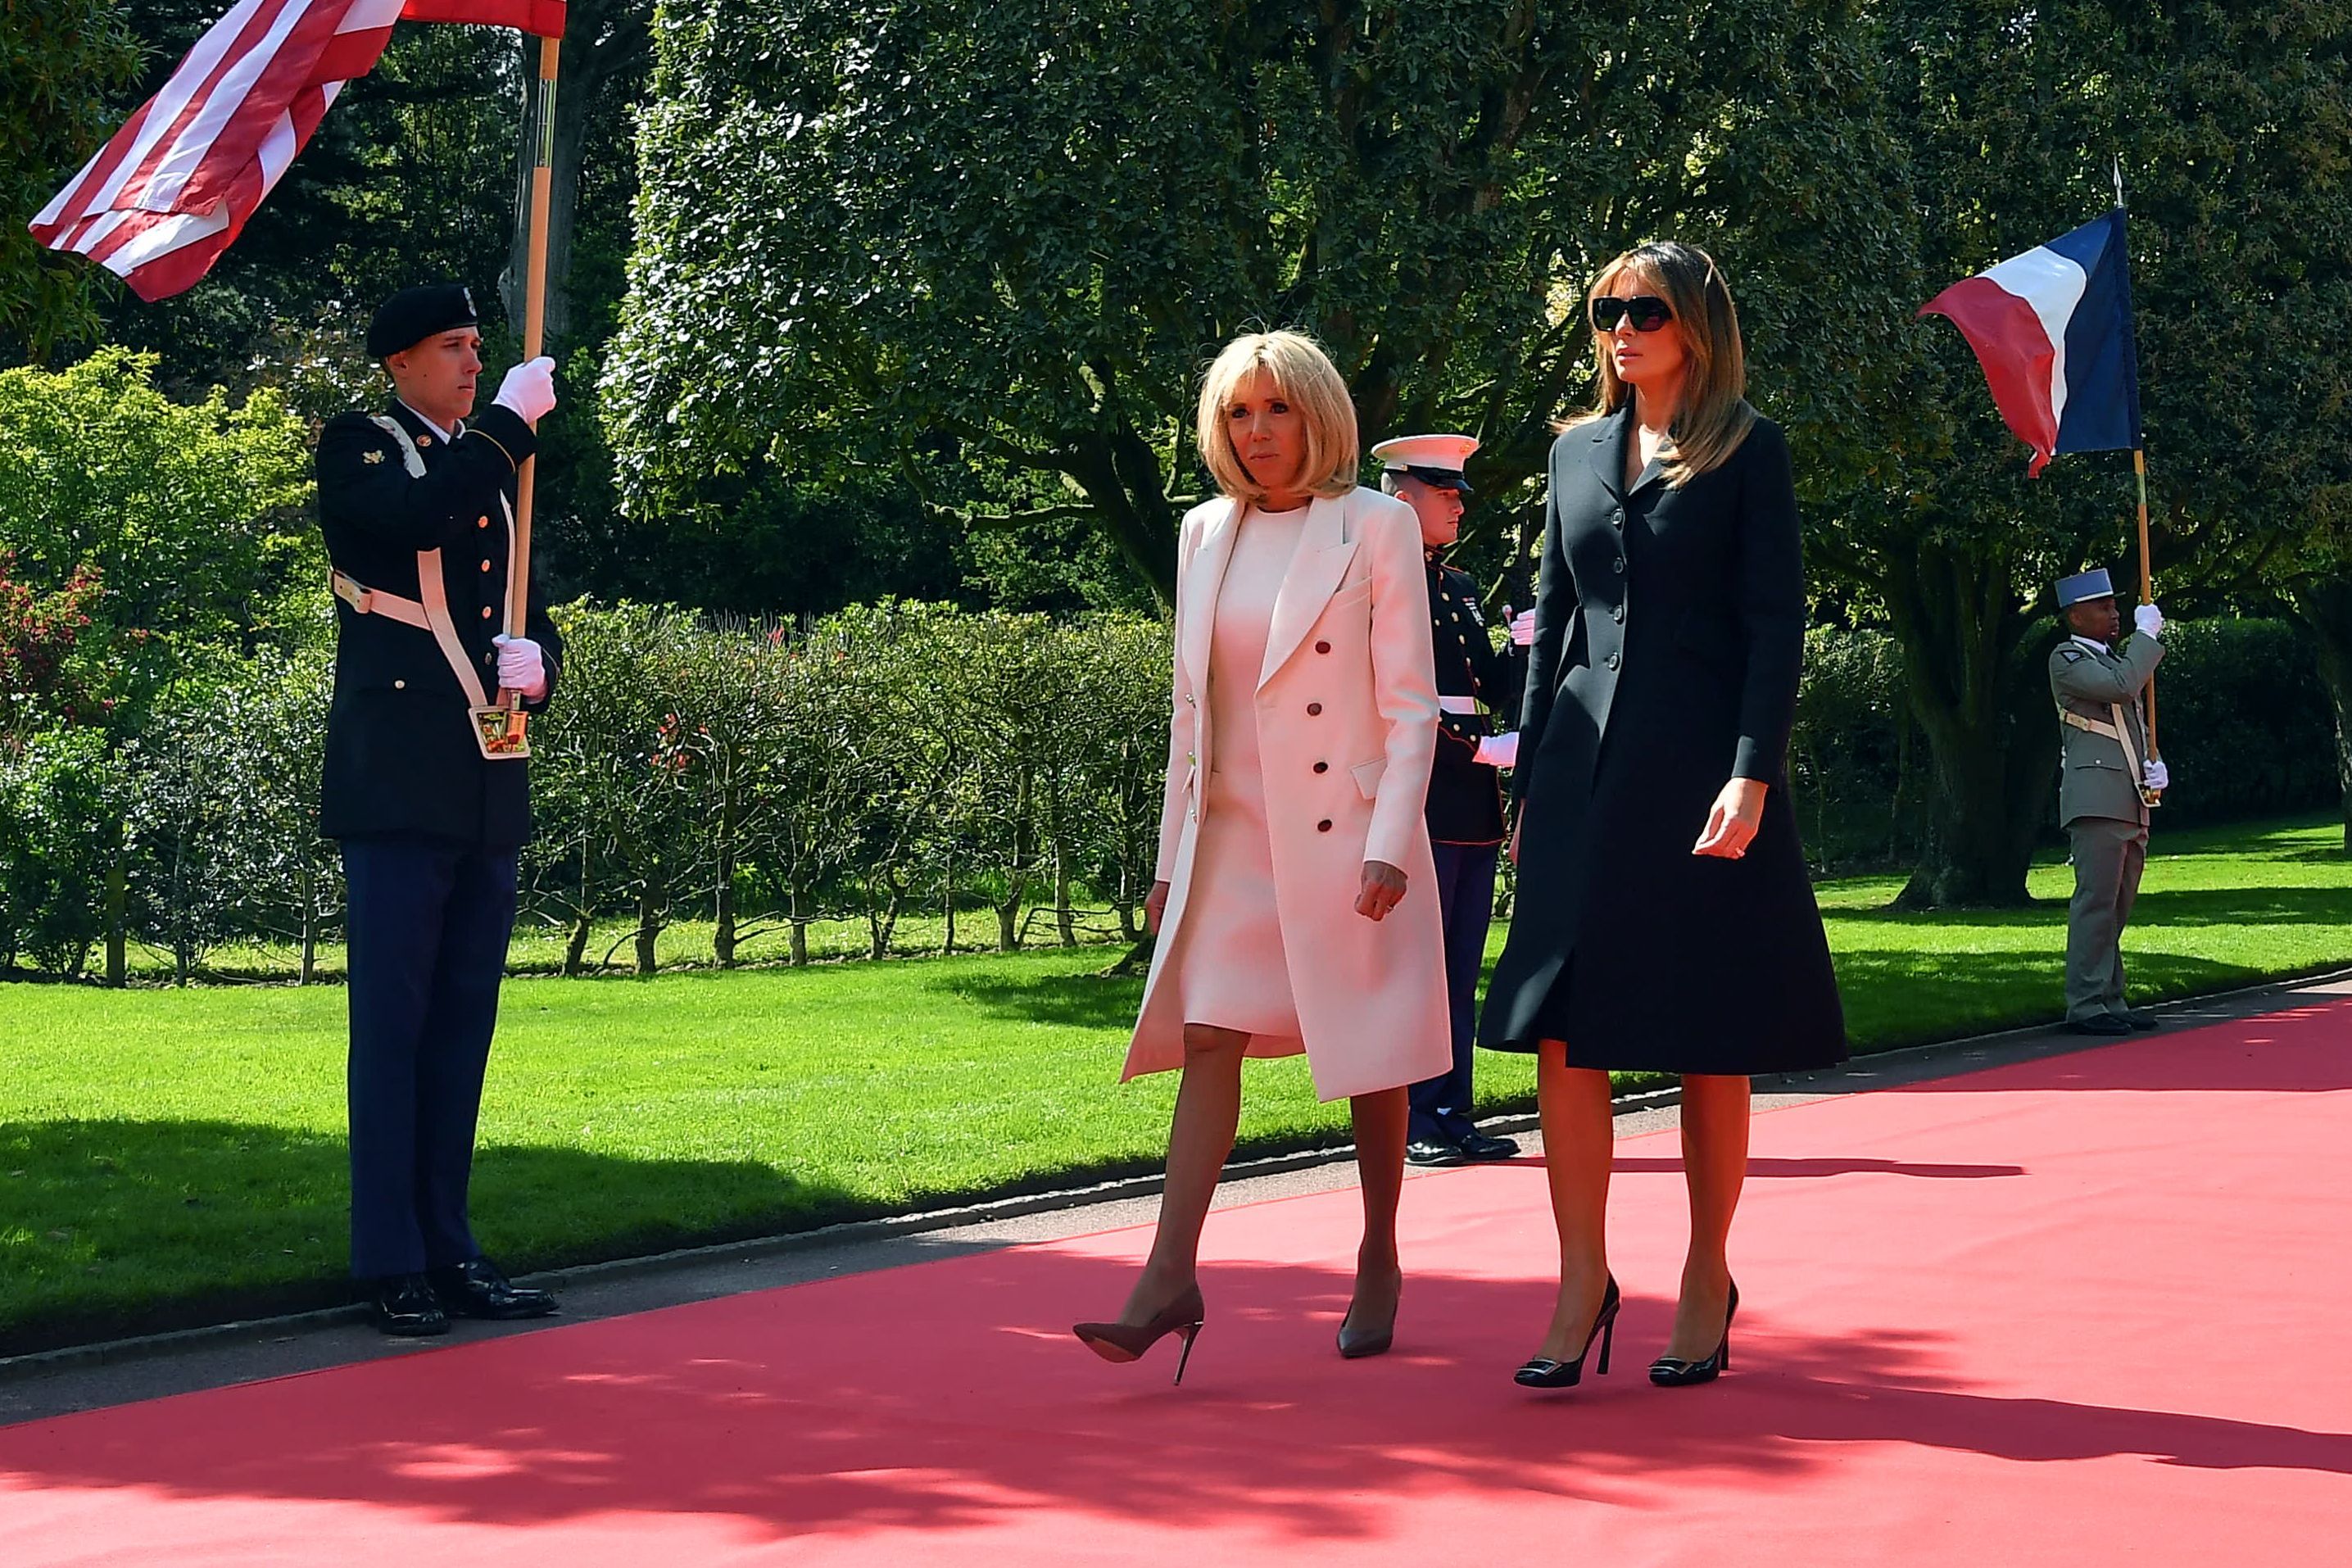 French President's wife Brigitte Macron (L) and US First Lady Melania Trump walk on the red carpet during a French-US ceremony at the Normandy American Cemetery.